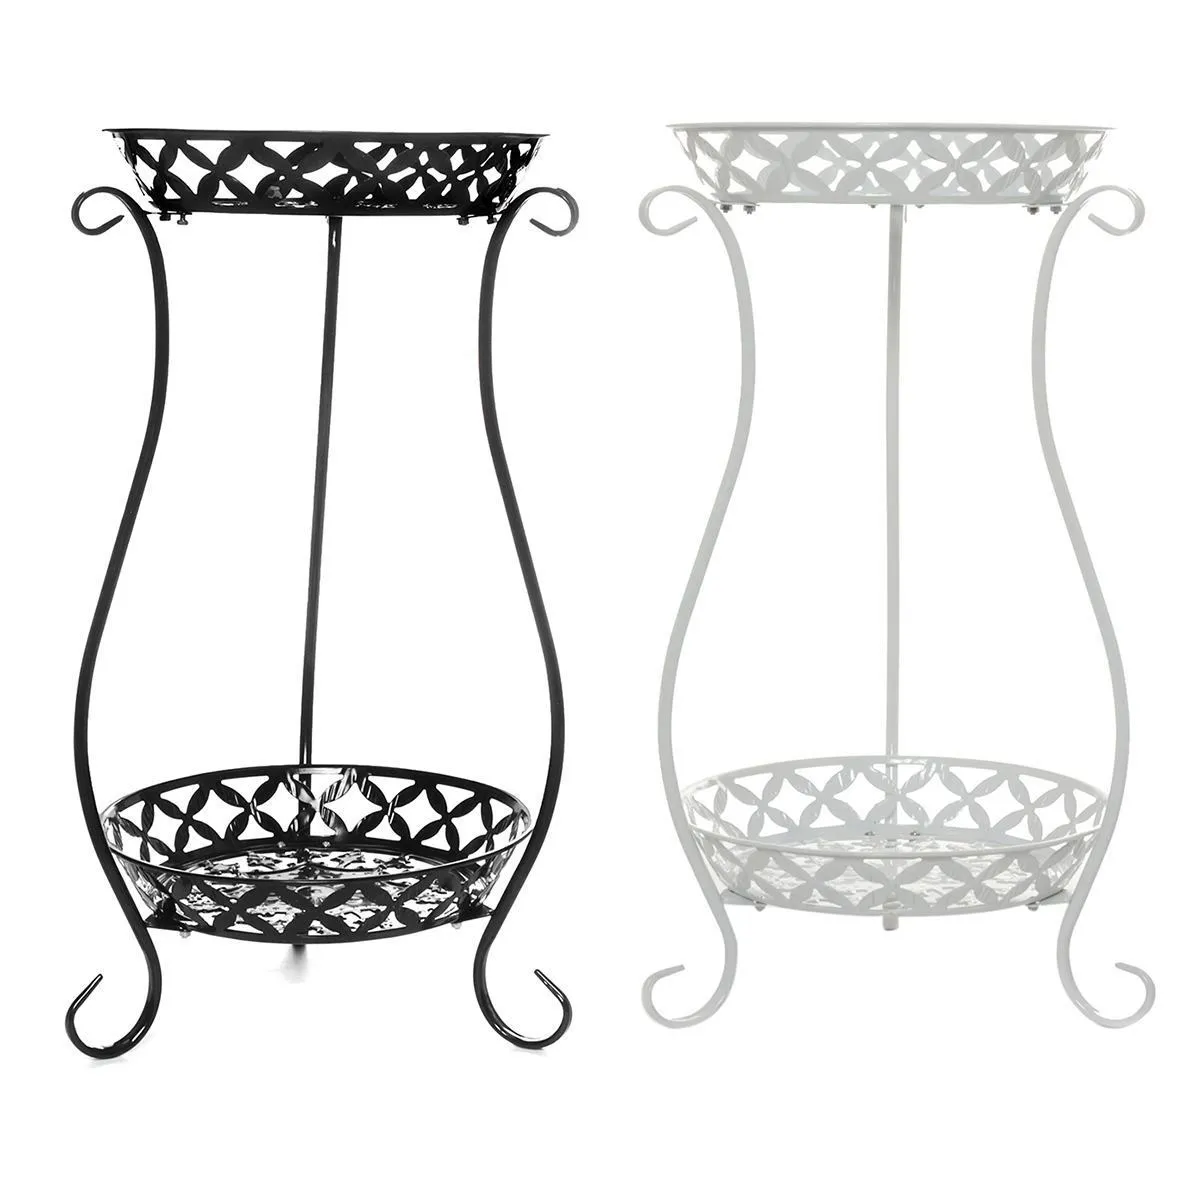 Wrought Iron Double-layer Plant Stand Flower Shelf for Rack Balcony Simple Indoor Living Room Coffee Bar Garden Flower Pot Shelf L268B